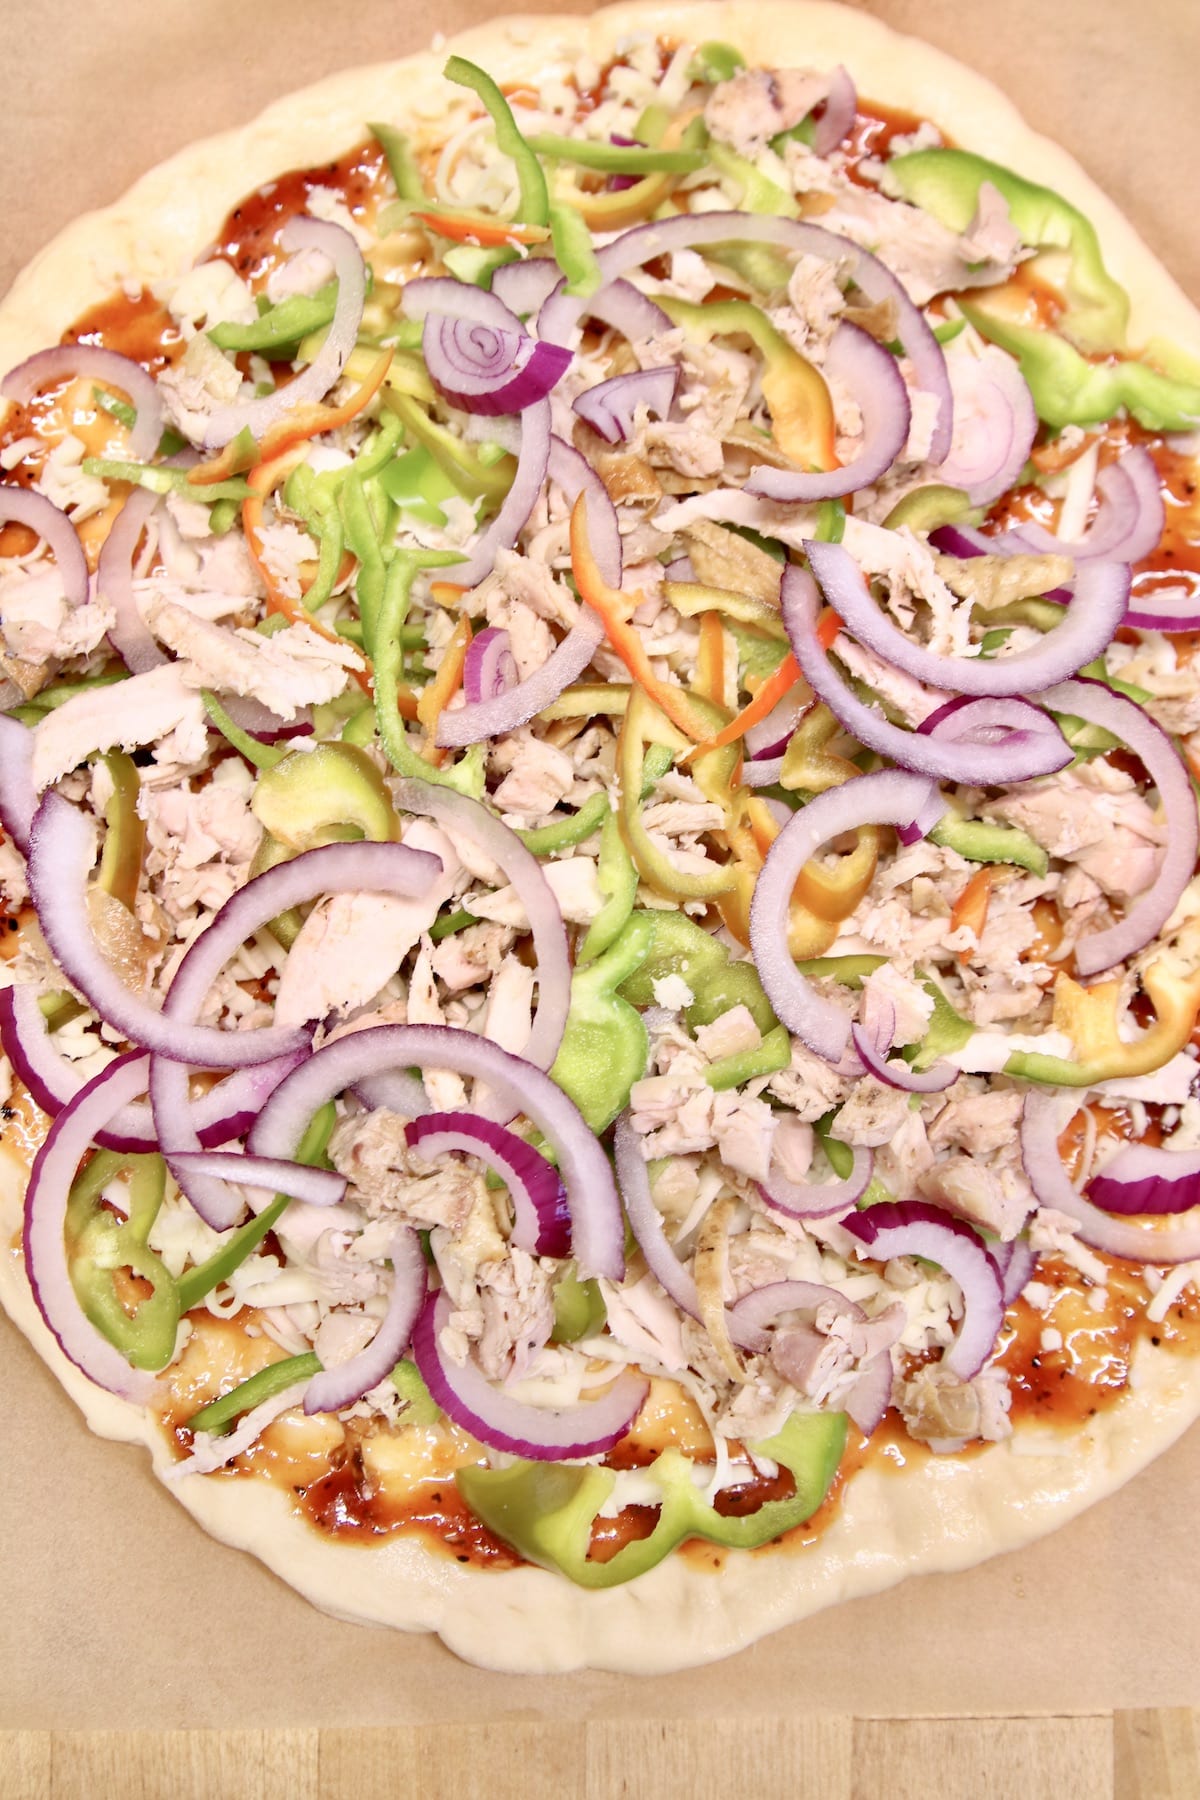 Pizza with chicken, red onion, peppers, ready to cook.